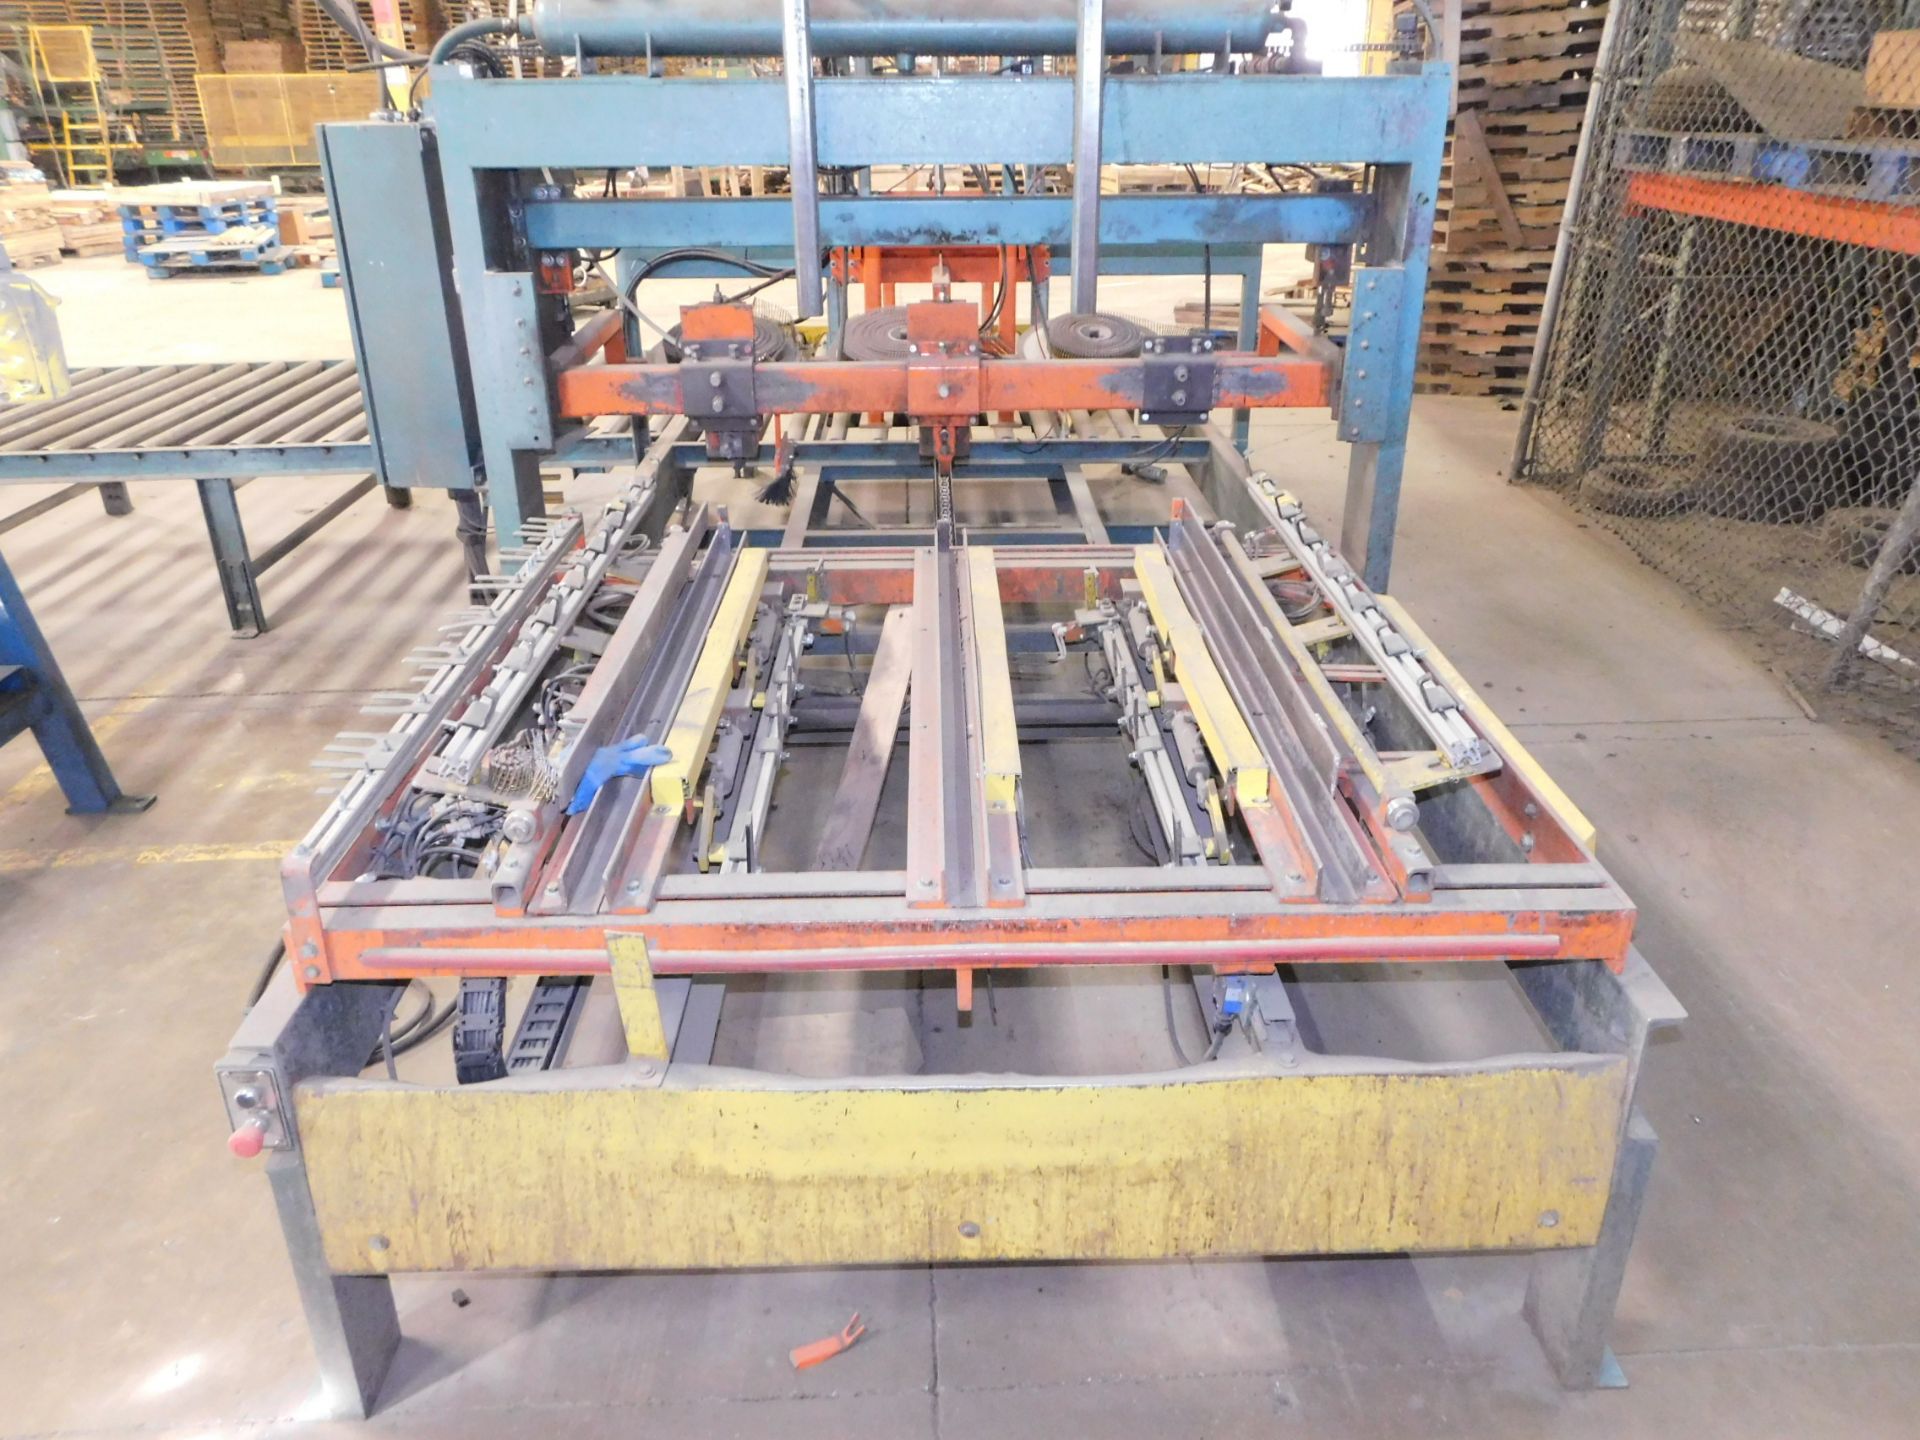 Rayco Edge Automatic Pallet Nailer, 64" x 10' Infeed Roller Conveyor, 6' x7' Stacking Area, Auto - Image 3 of 11